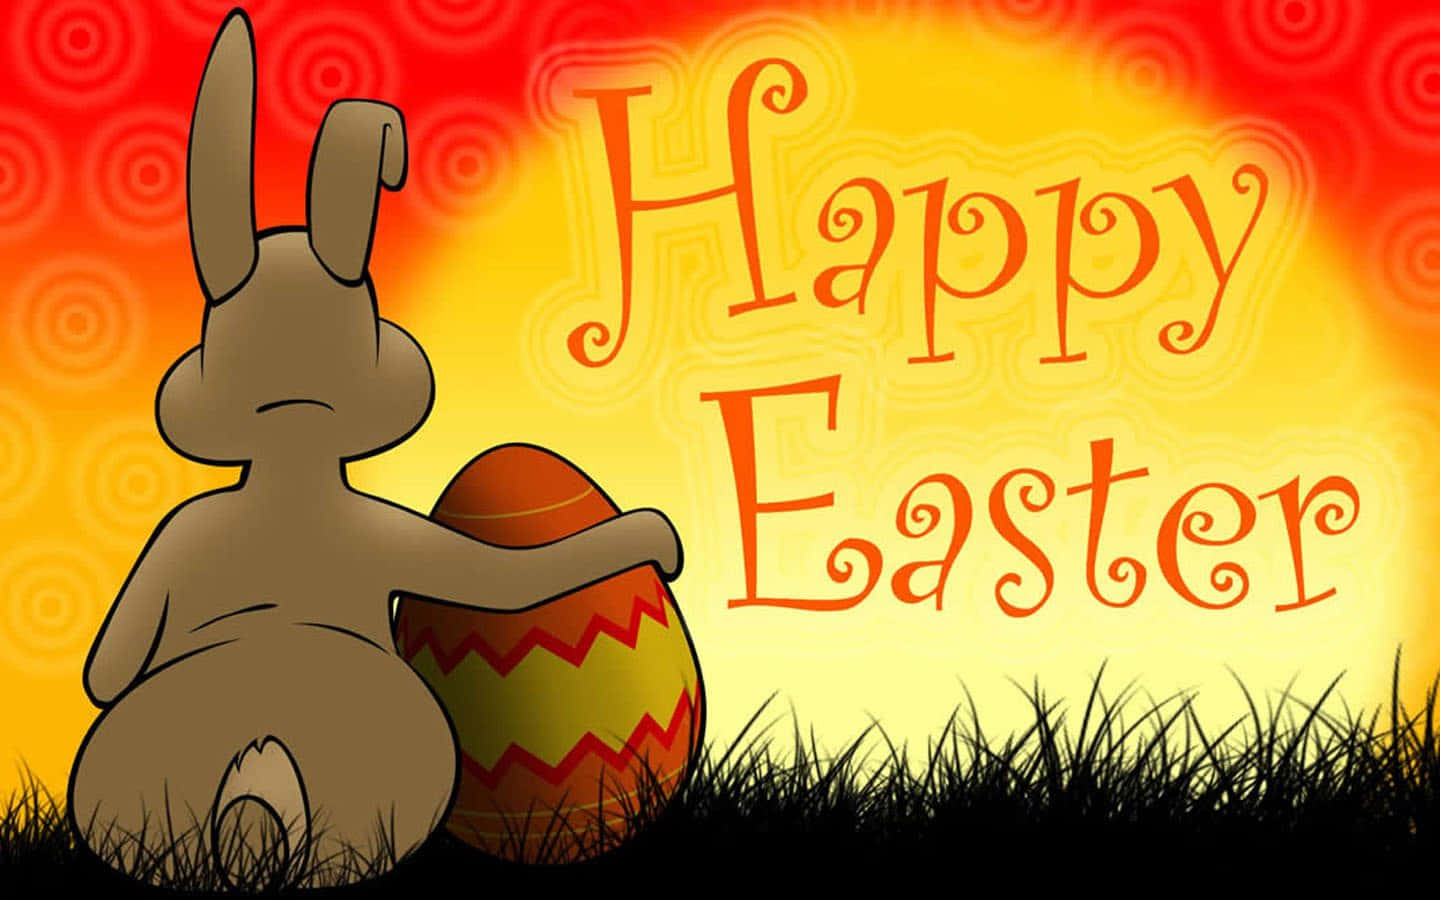 Celebrate Easter with lots of bunny hugs and colorful eggs! Wallpaper